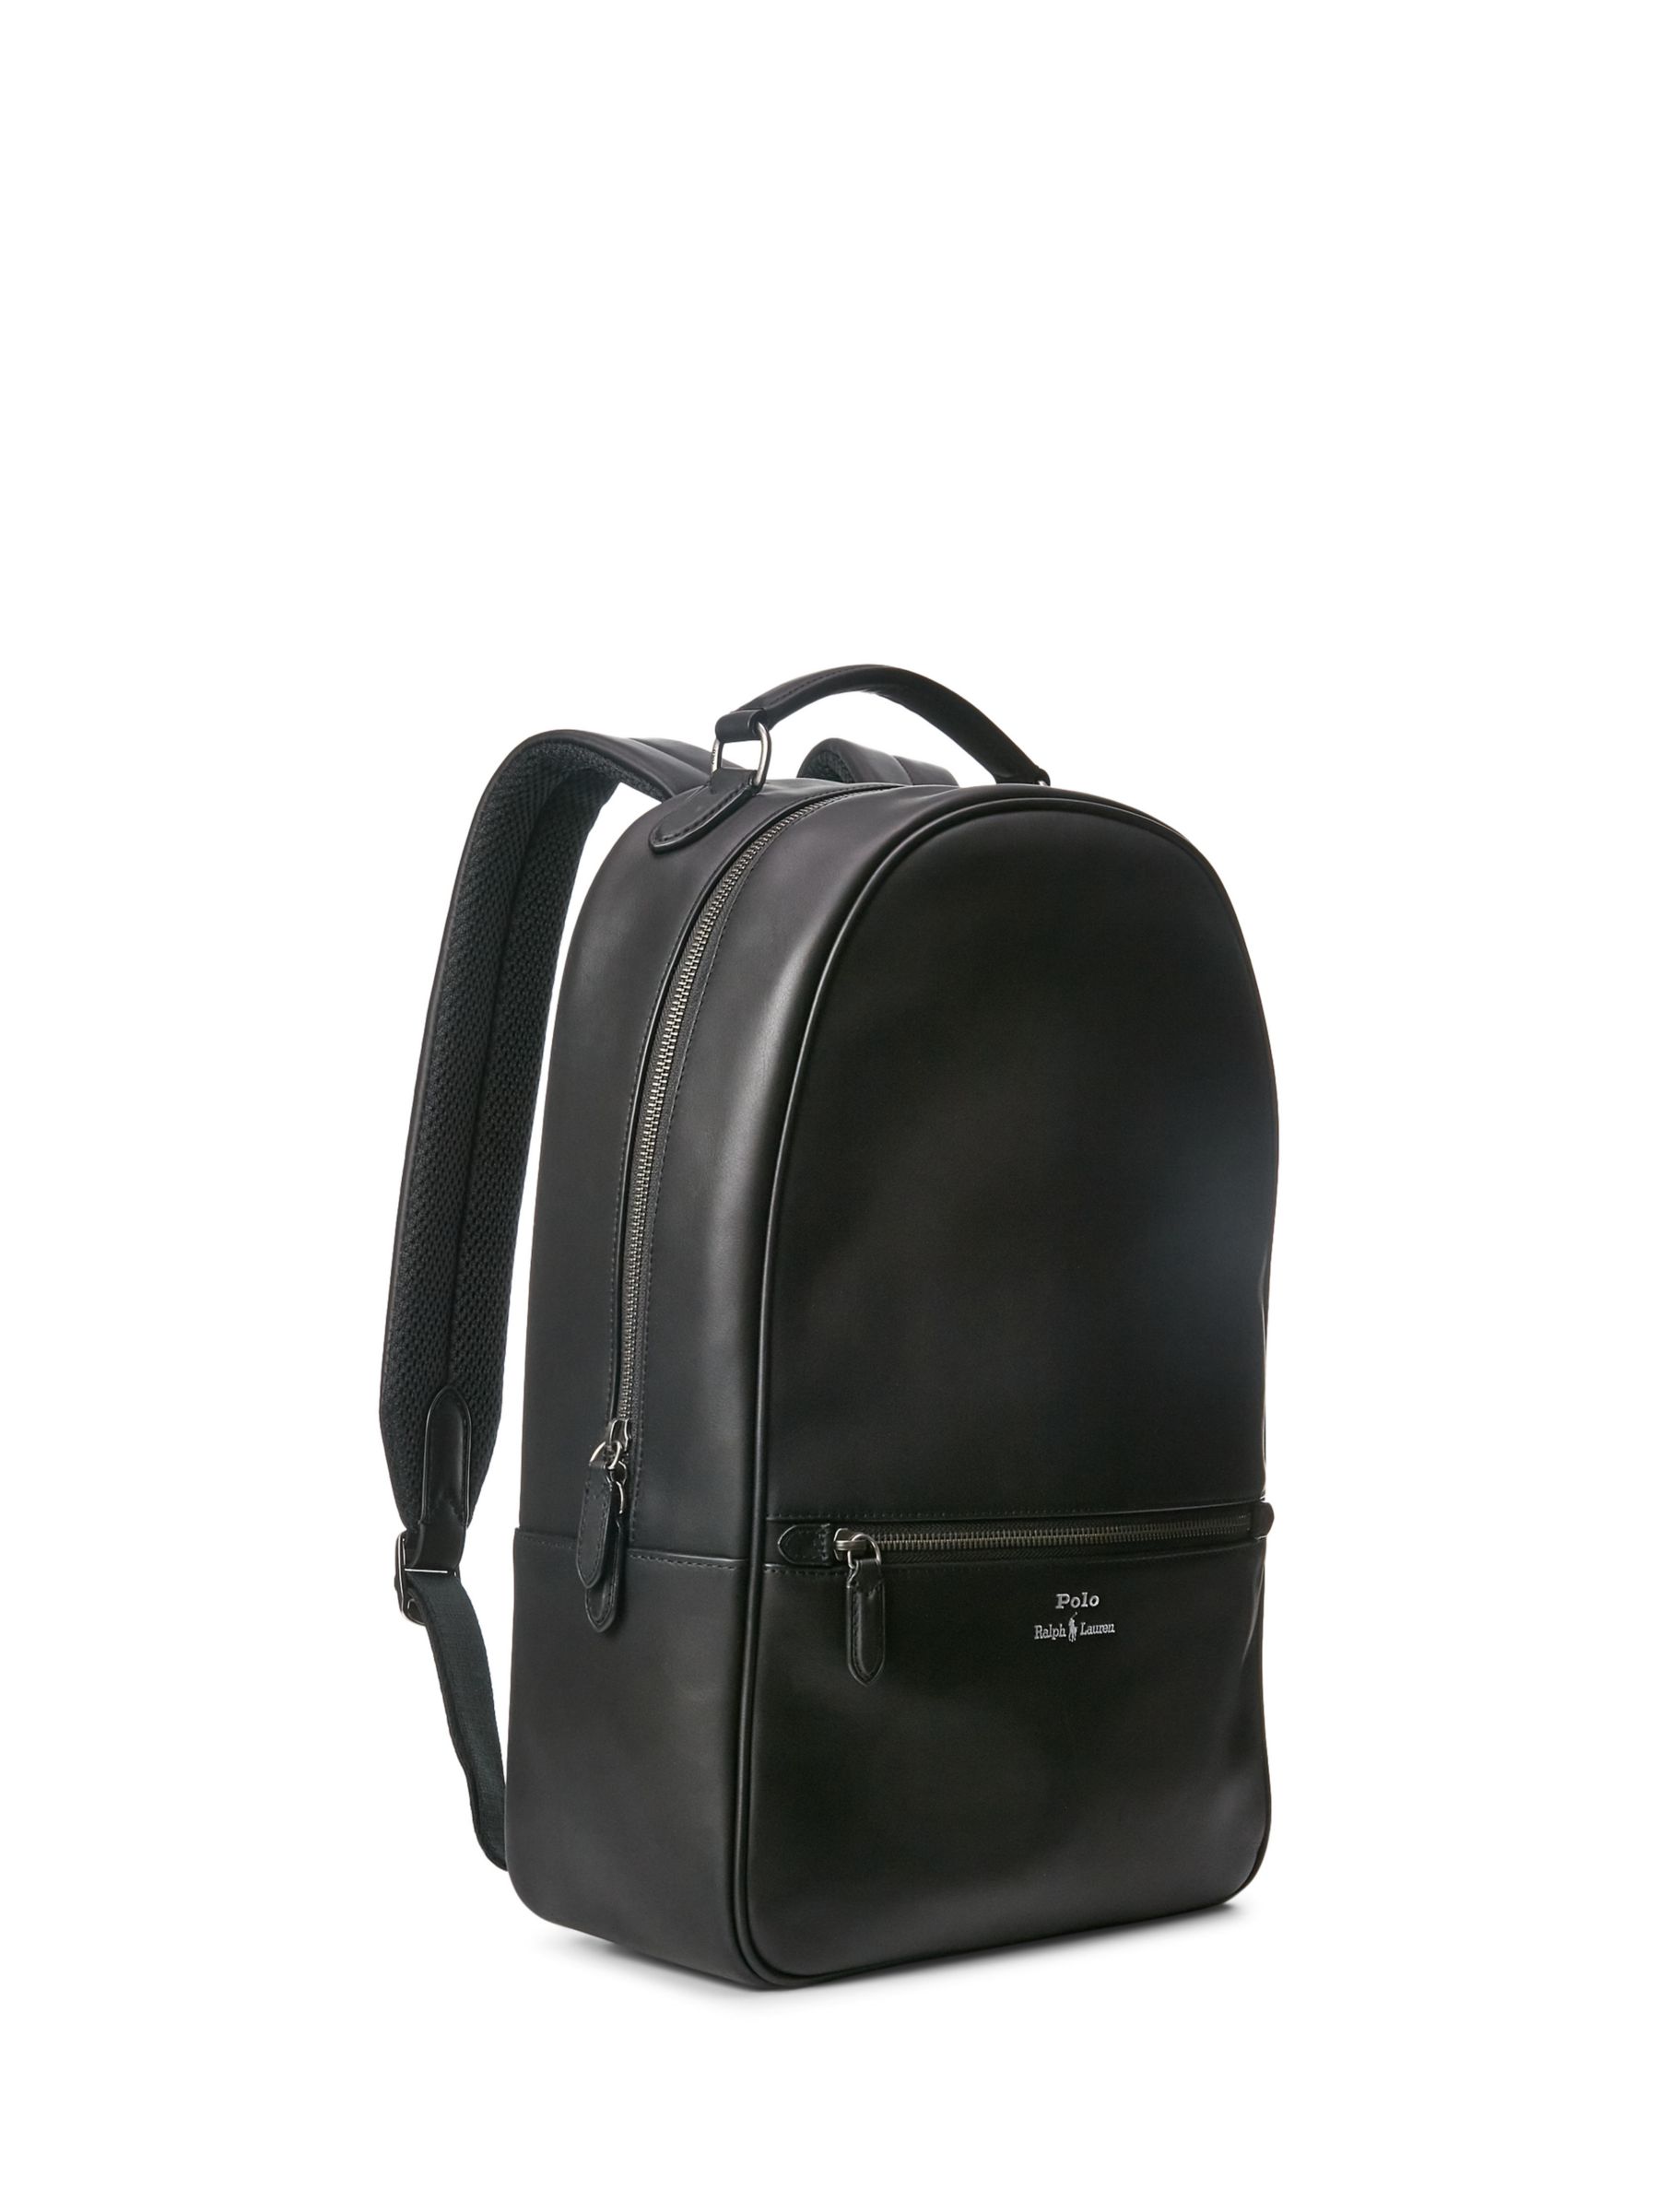 Ralph Lauren Smooth Leather Backpack, Black at John Lewis & Partners